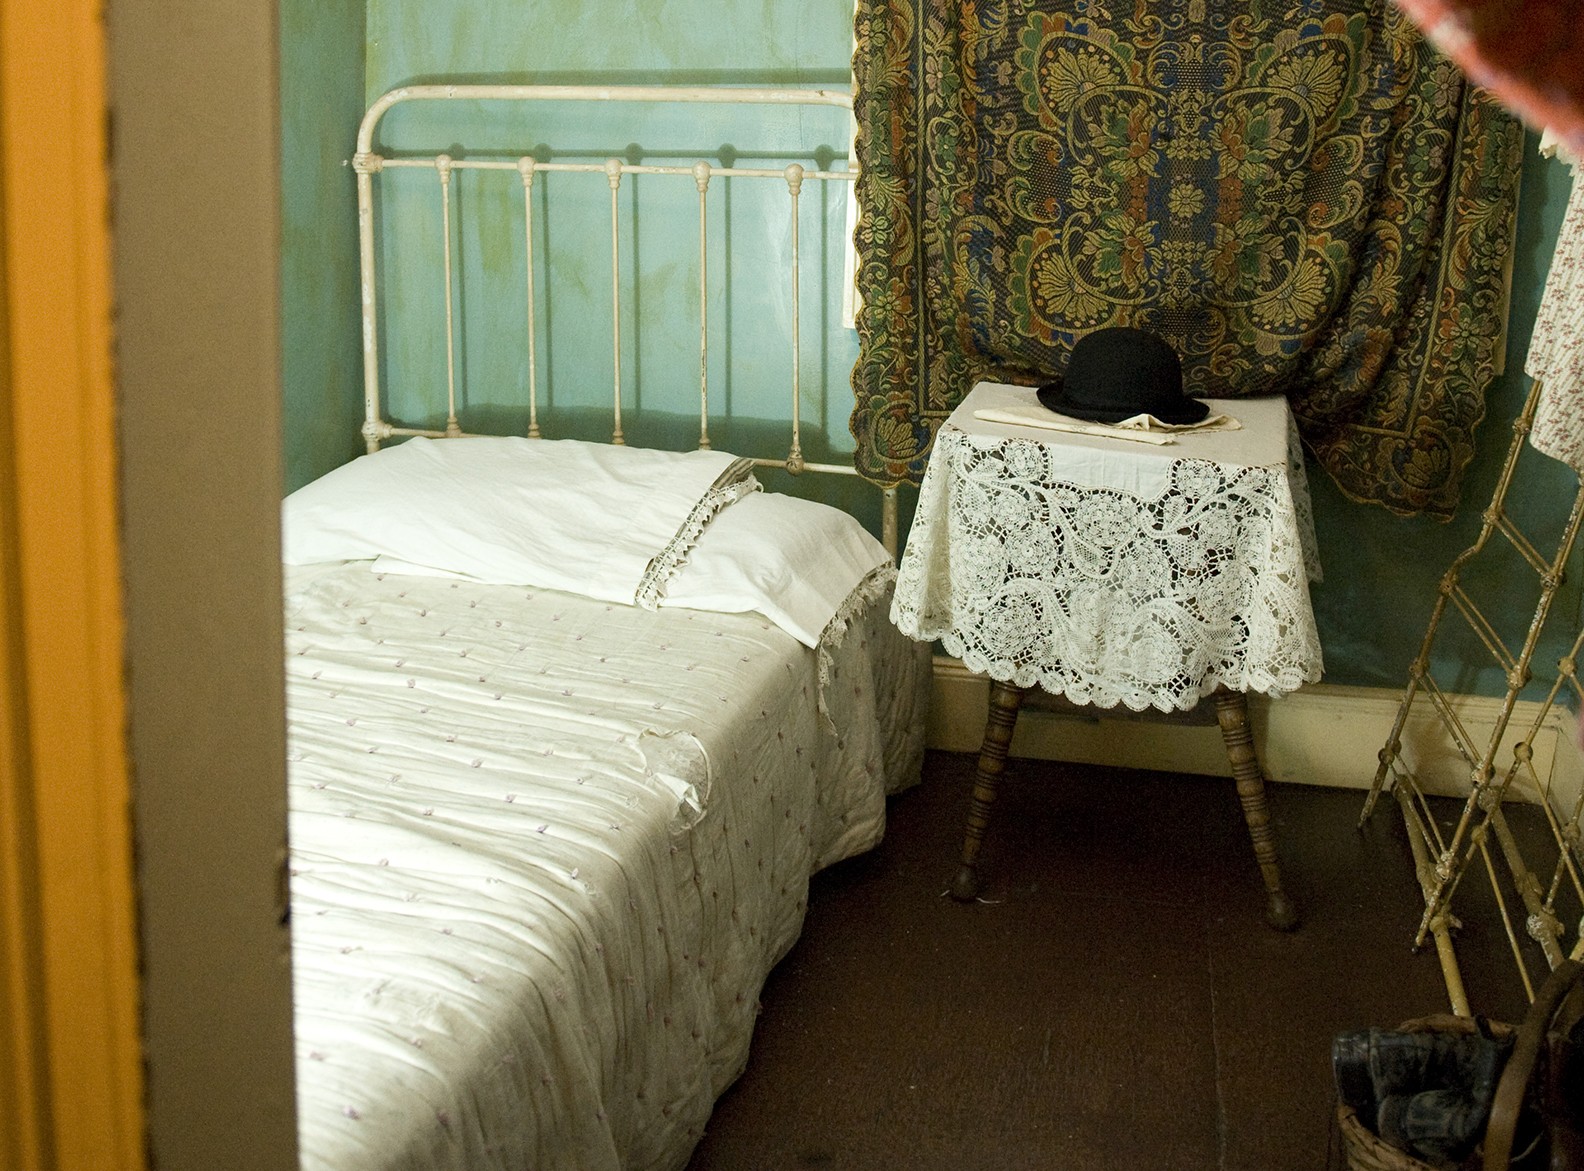 Small bed and stool inside a recreated tenement apartment.